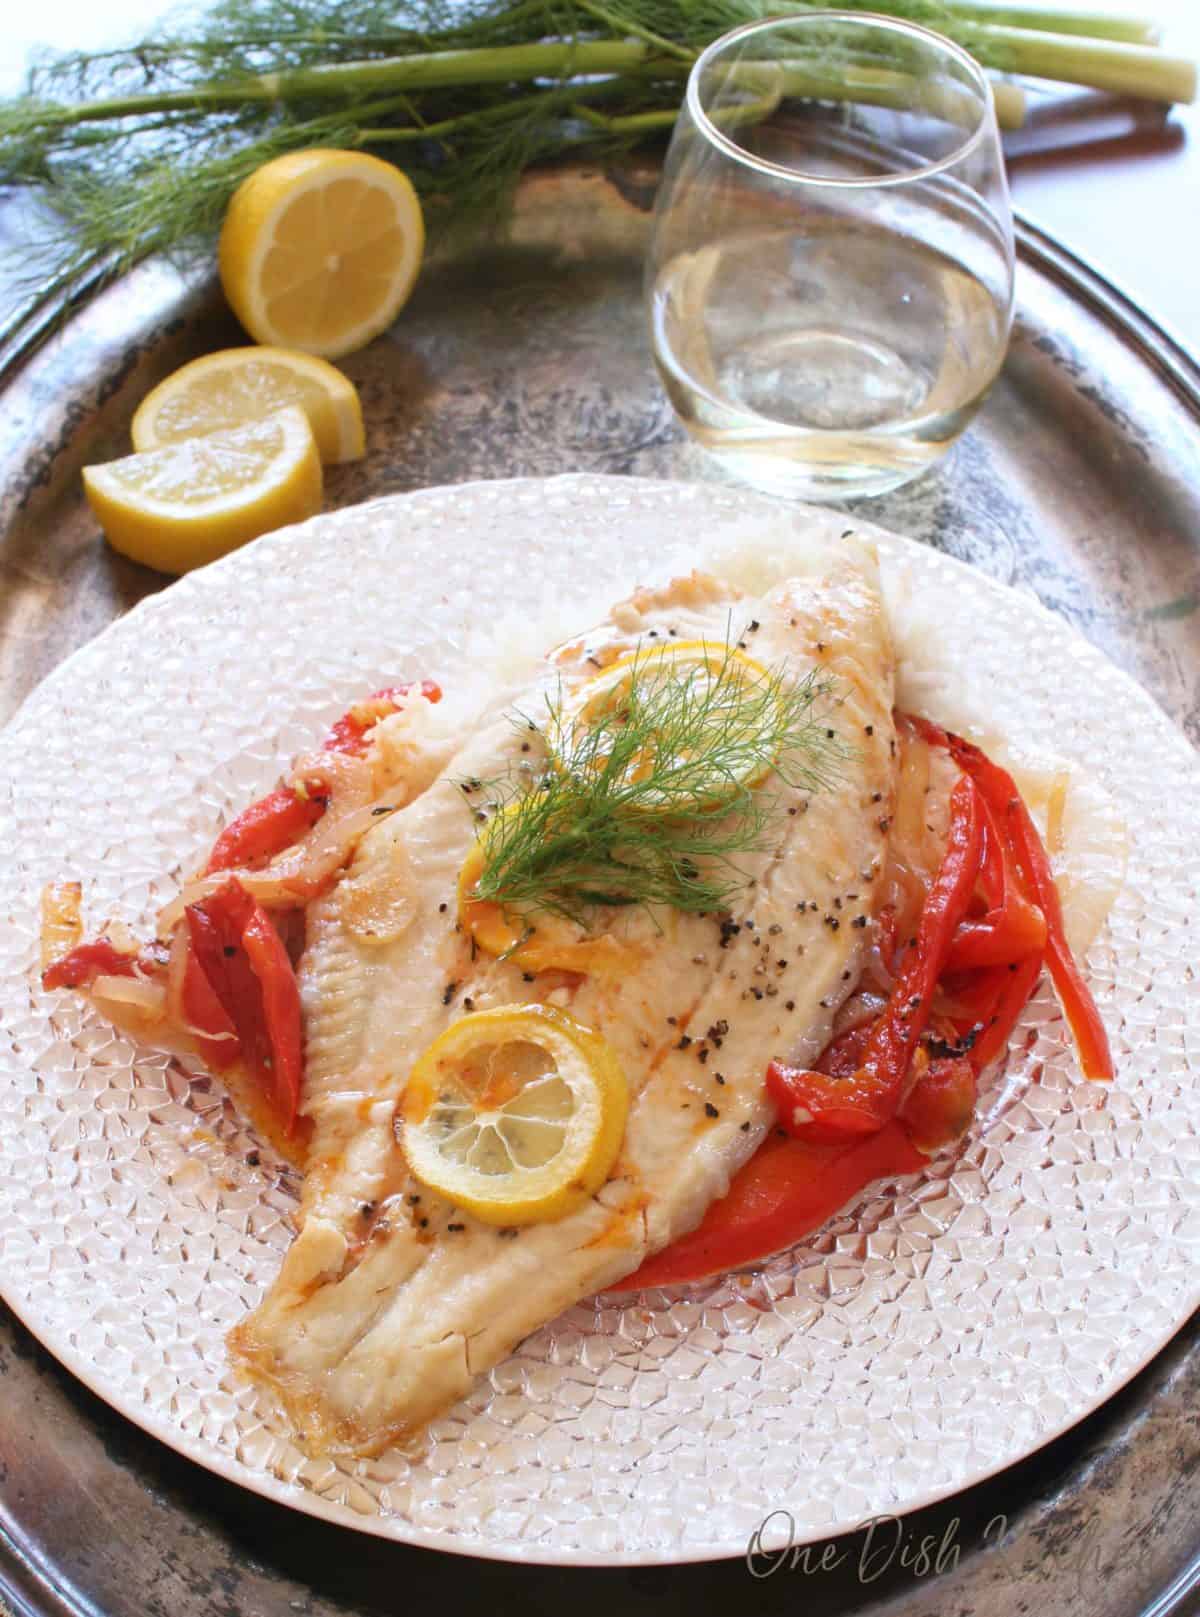 Baked catfish garnished with three lemon wheels over cooked white rice, red peppers, and onions on a glass plate on a metal tray with lemon slices and a glass of white wine.